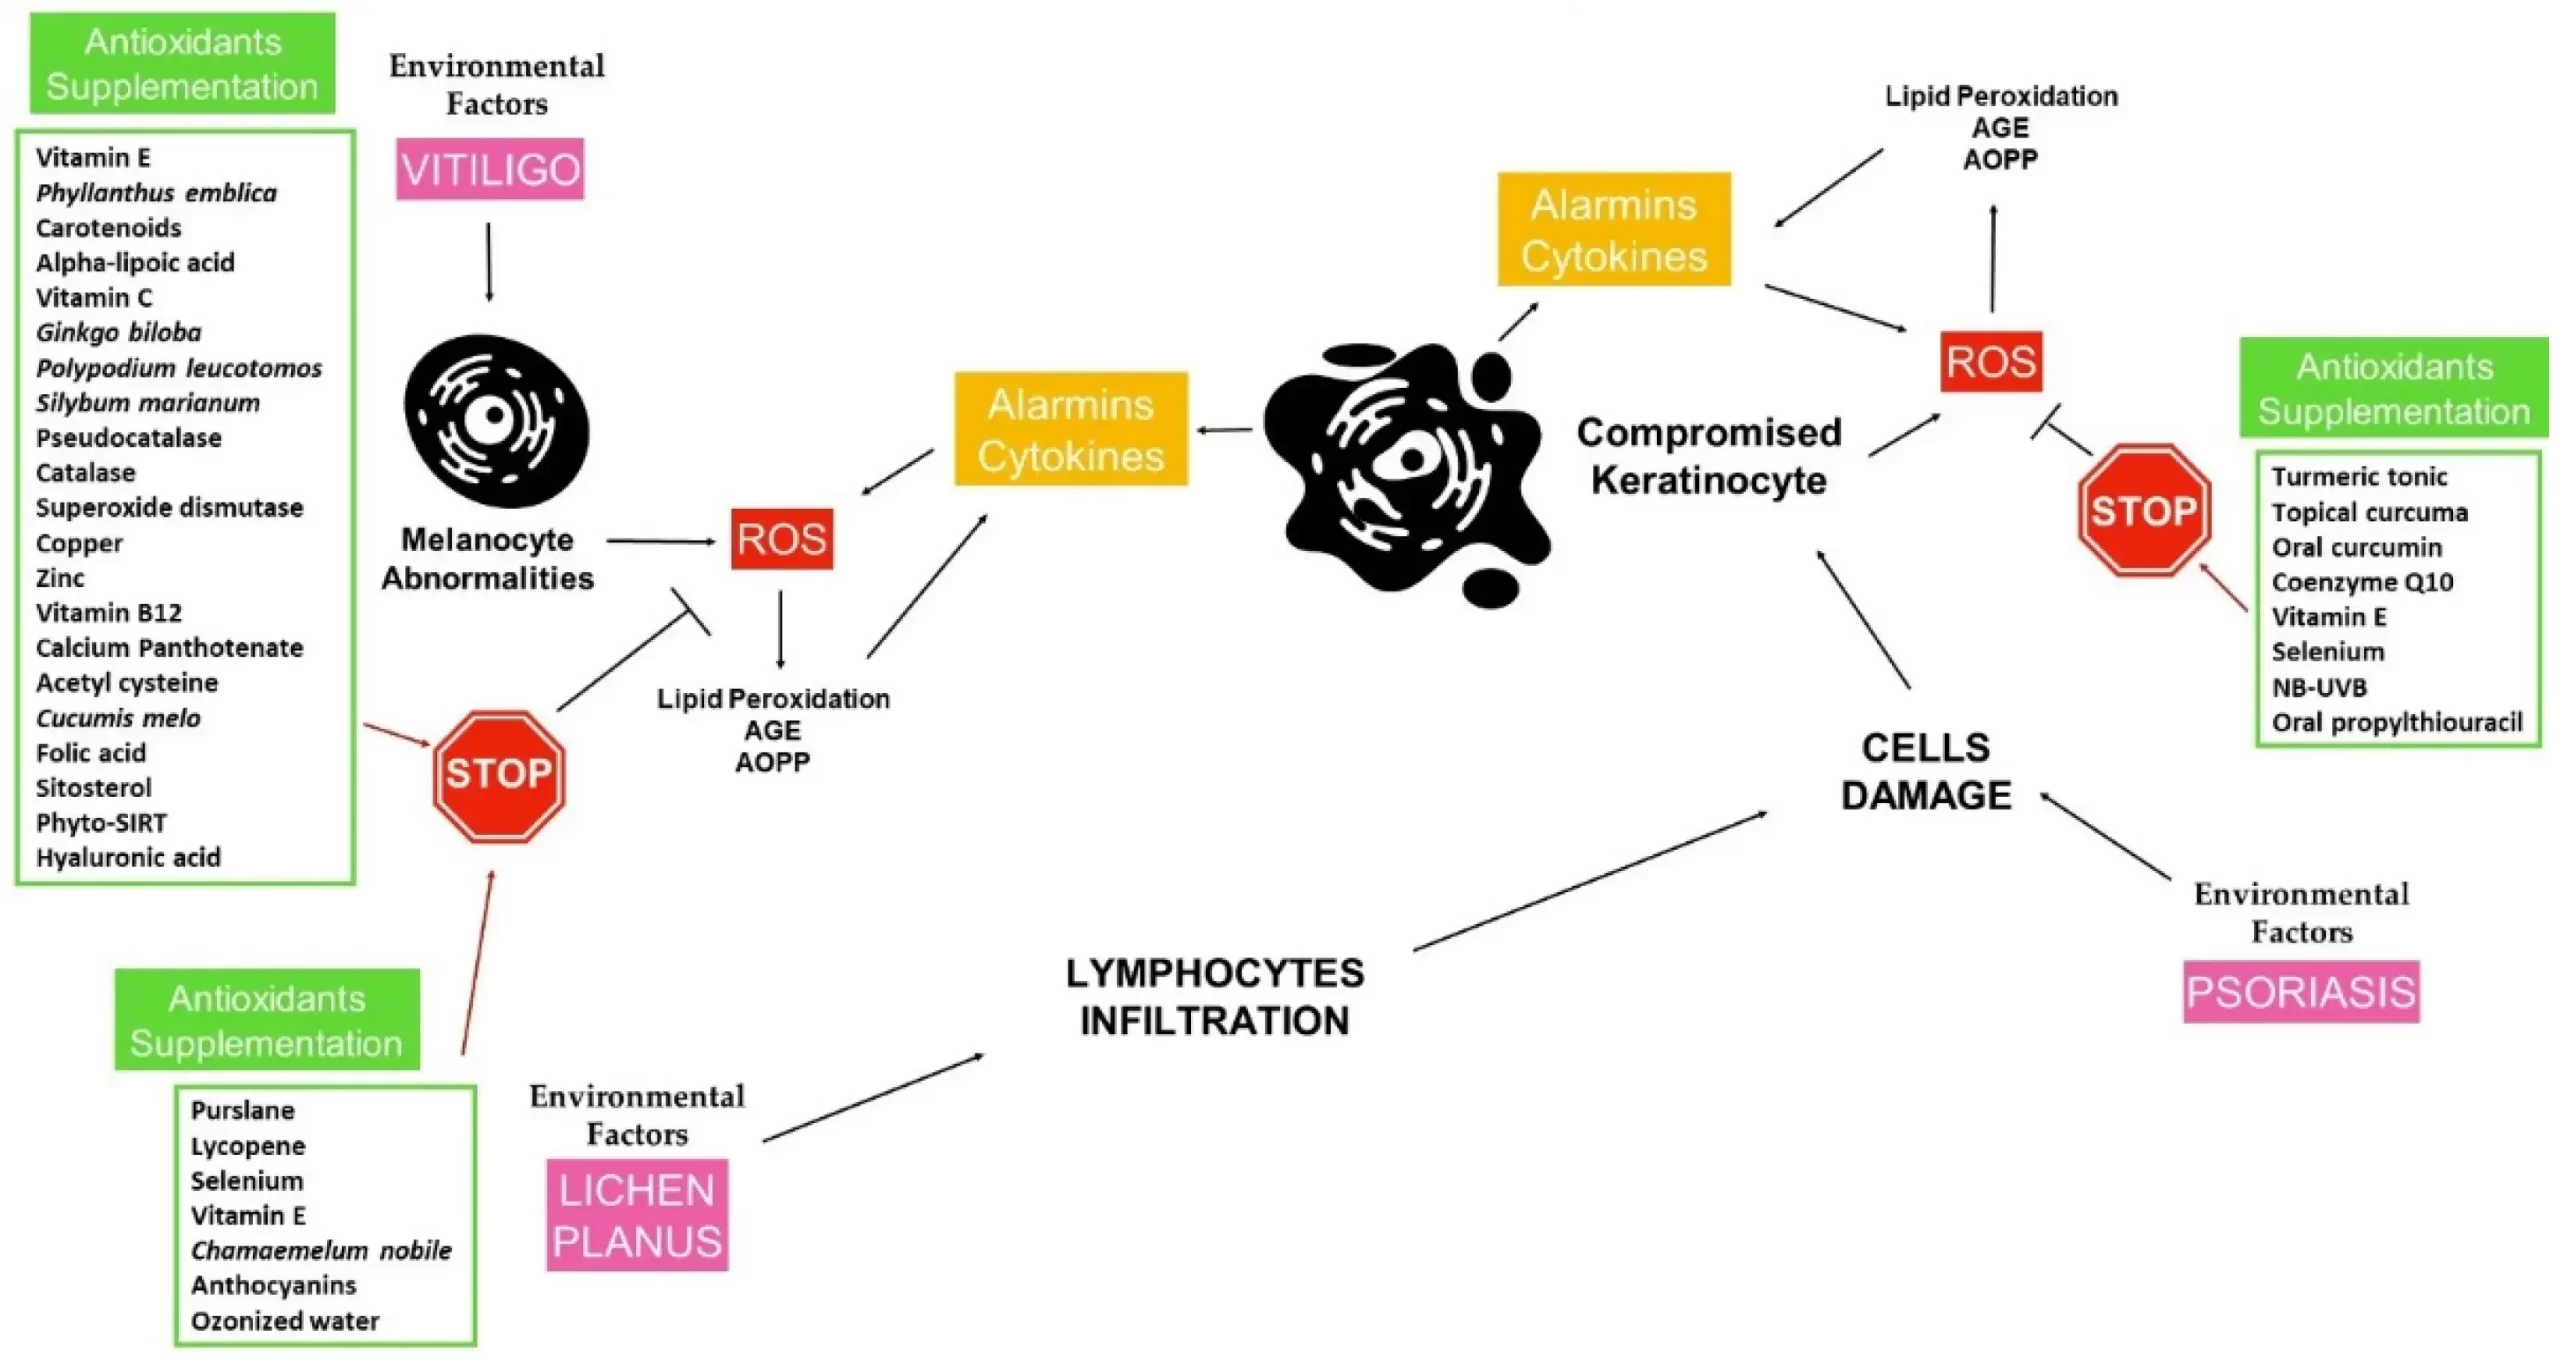 Oxidative stress plays an important pathogenetic role in many chronic inflammatory diseases